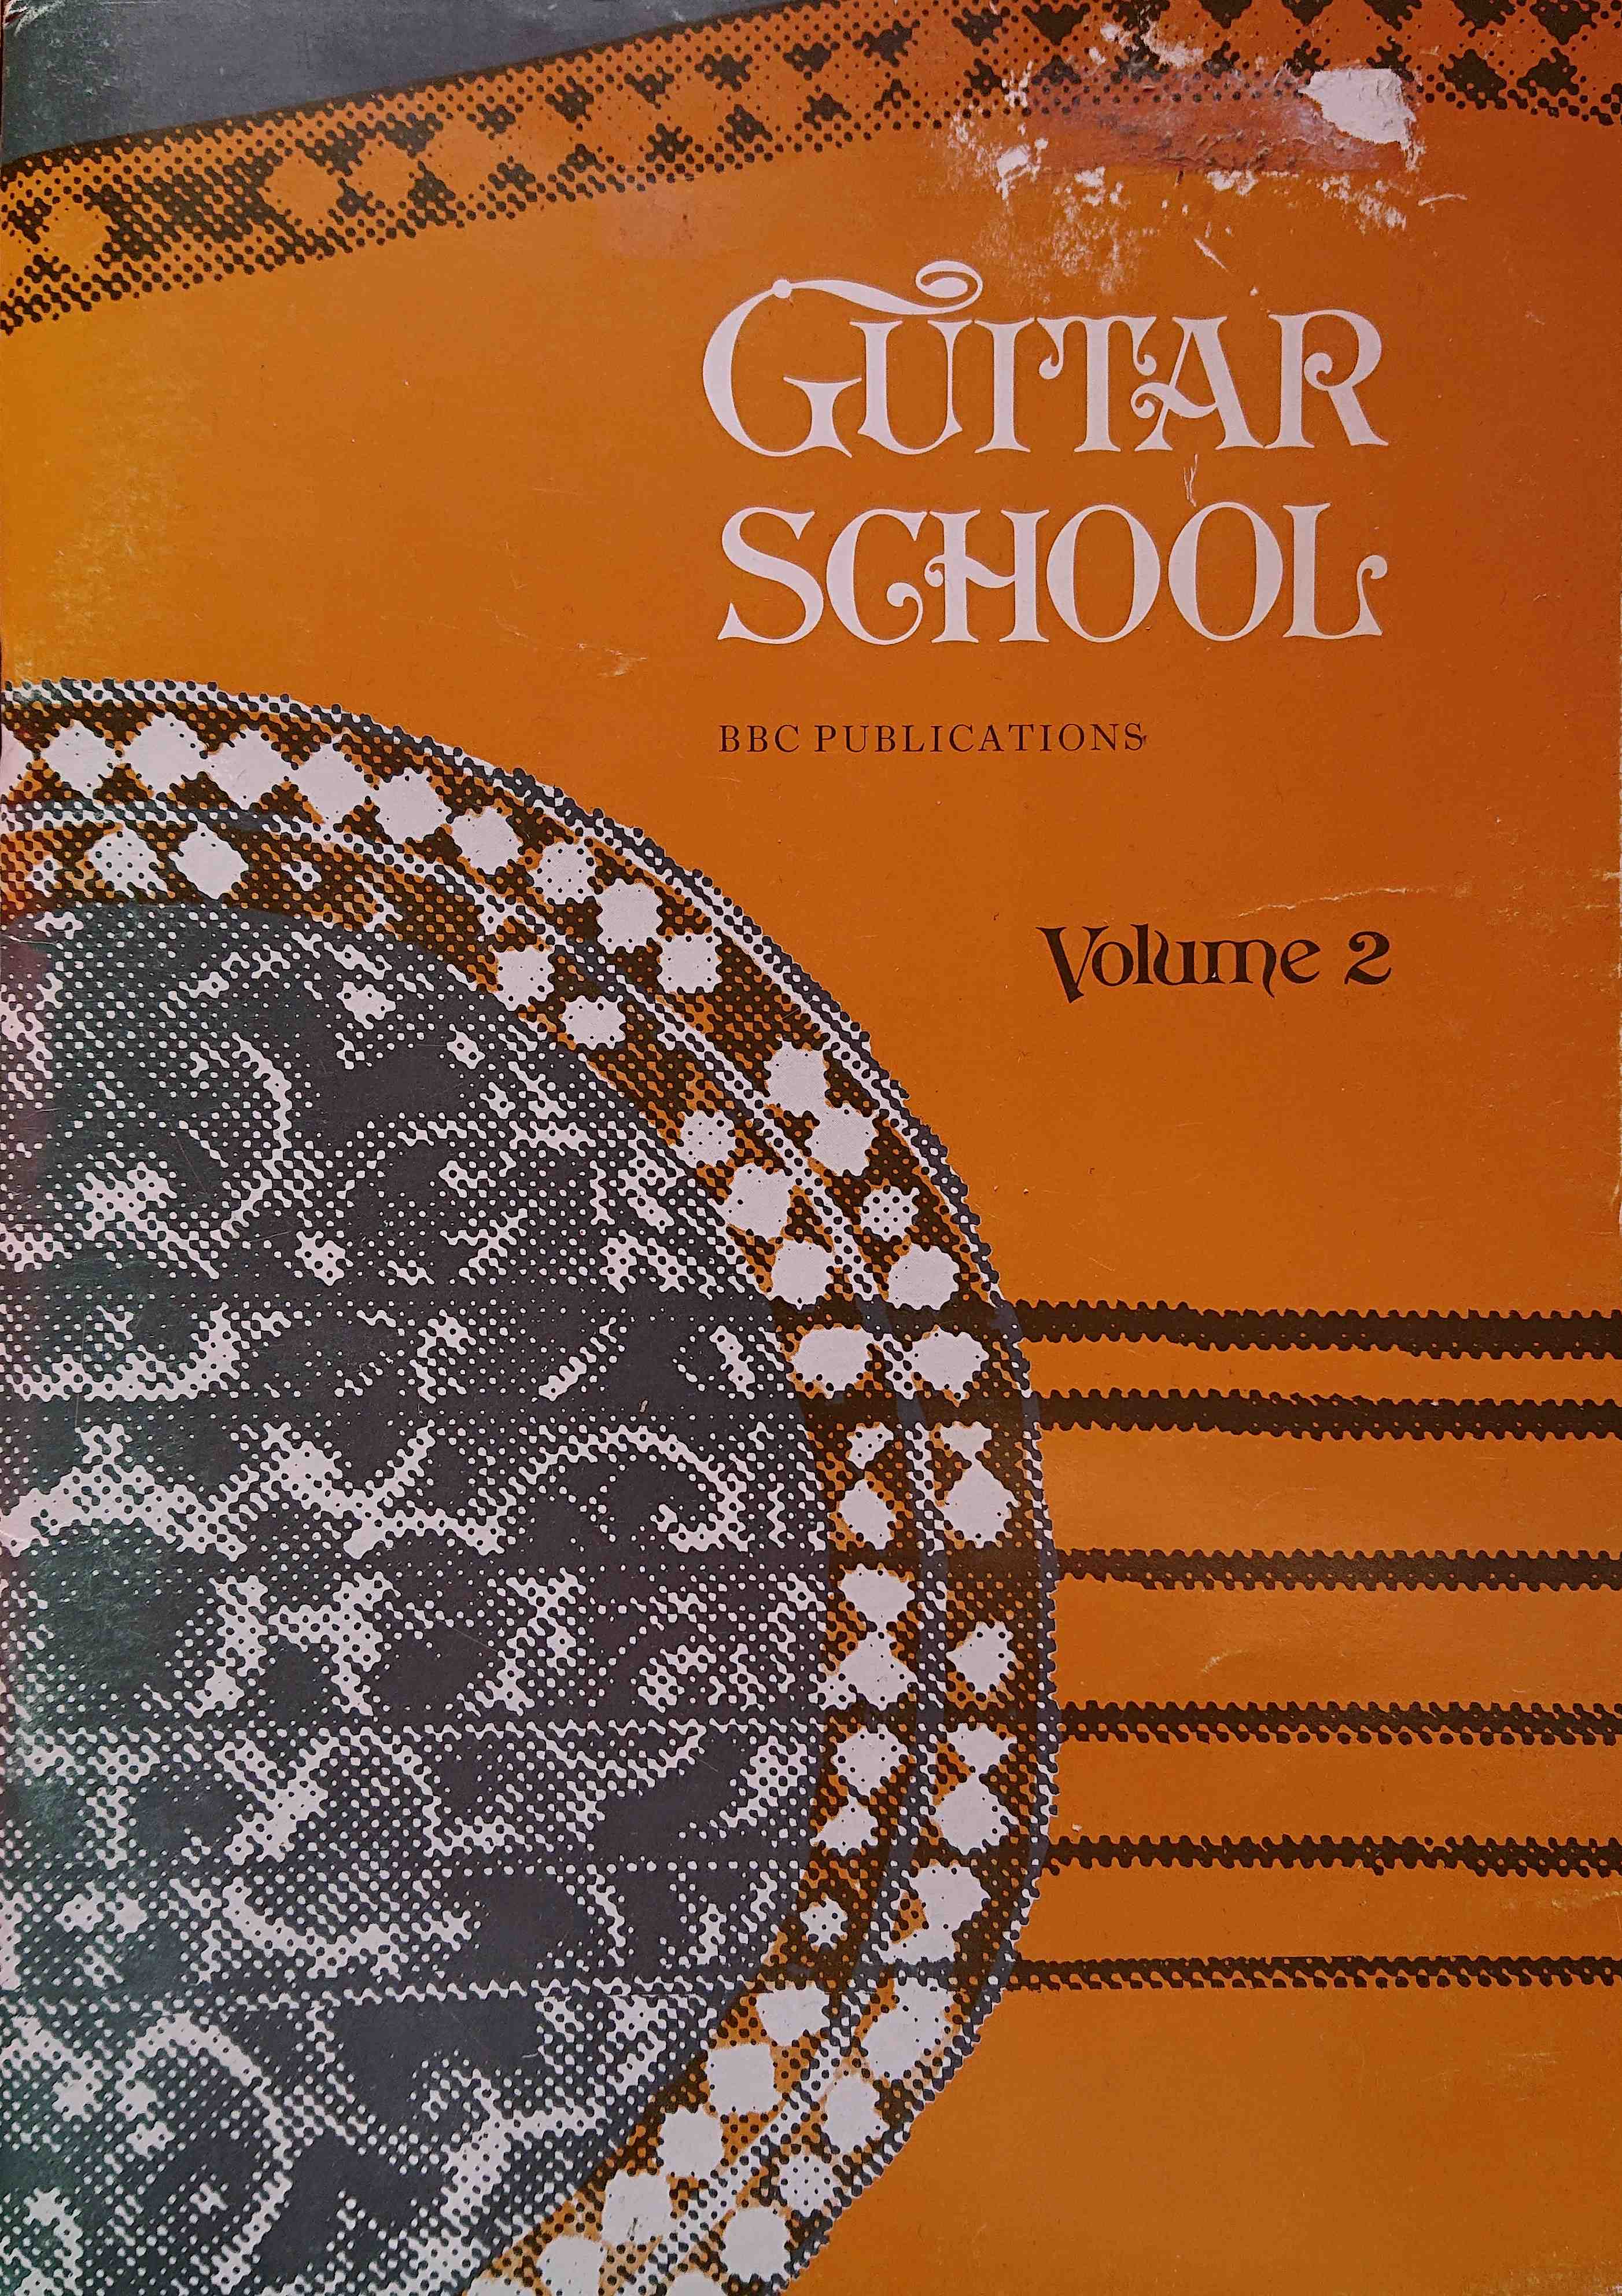 Picture of Guitar school - Volume 2 by artist Michael Jessett from the BBC books - Records and Tapes library